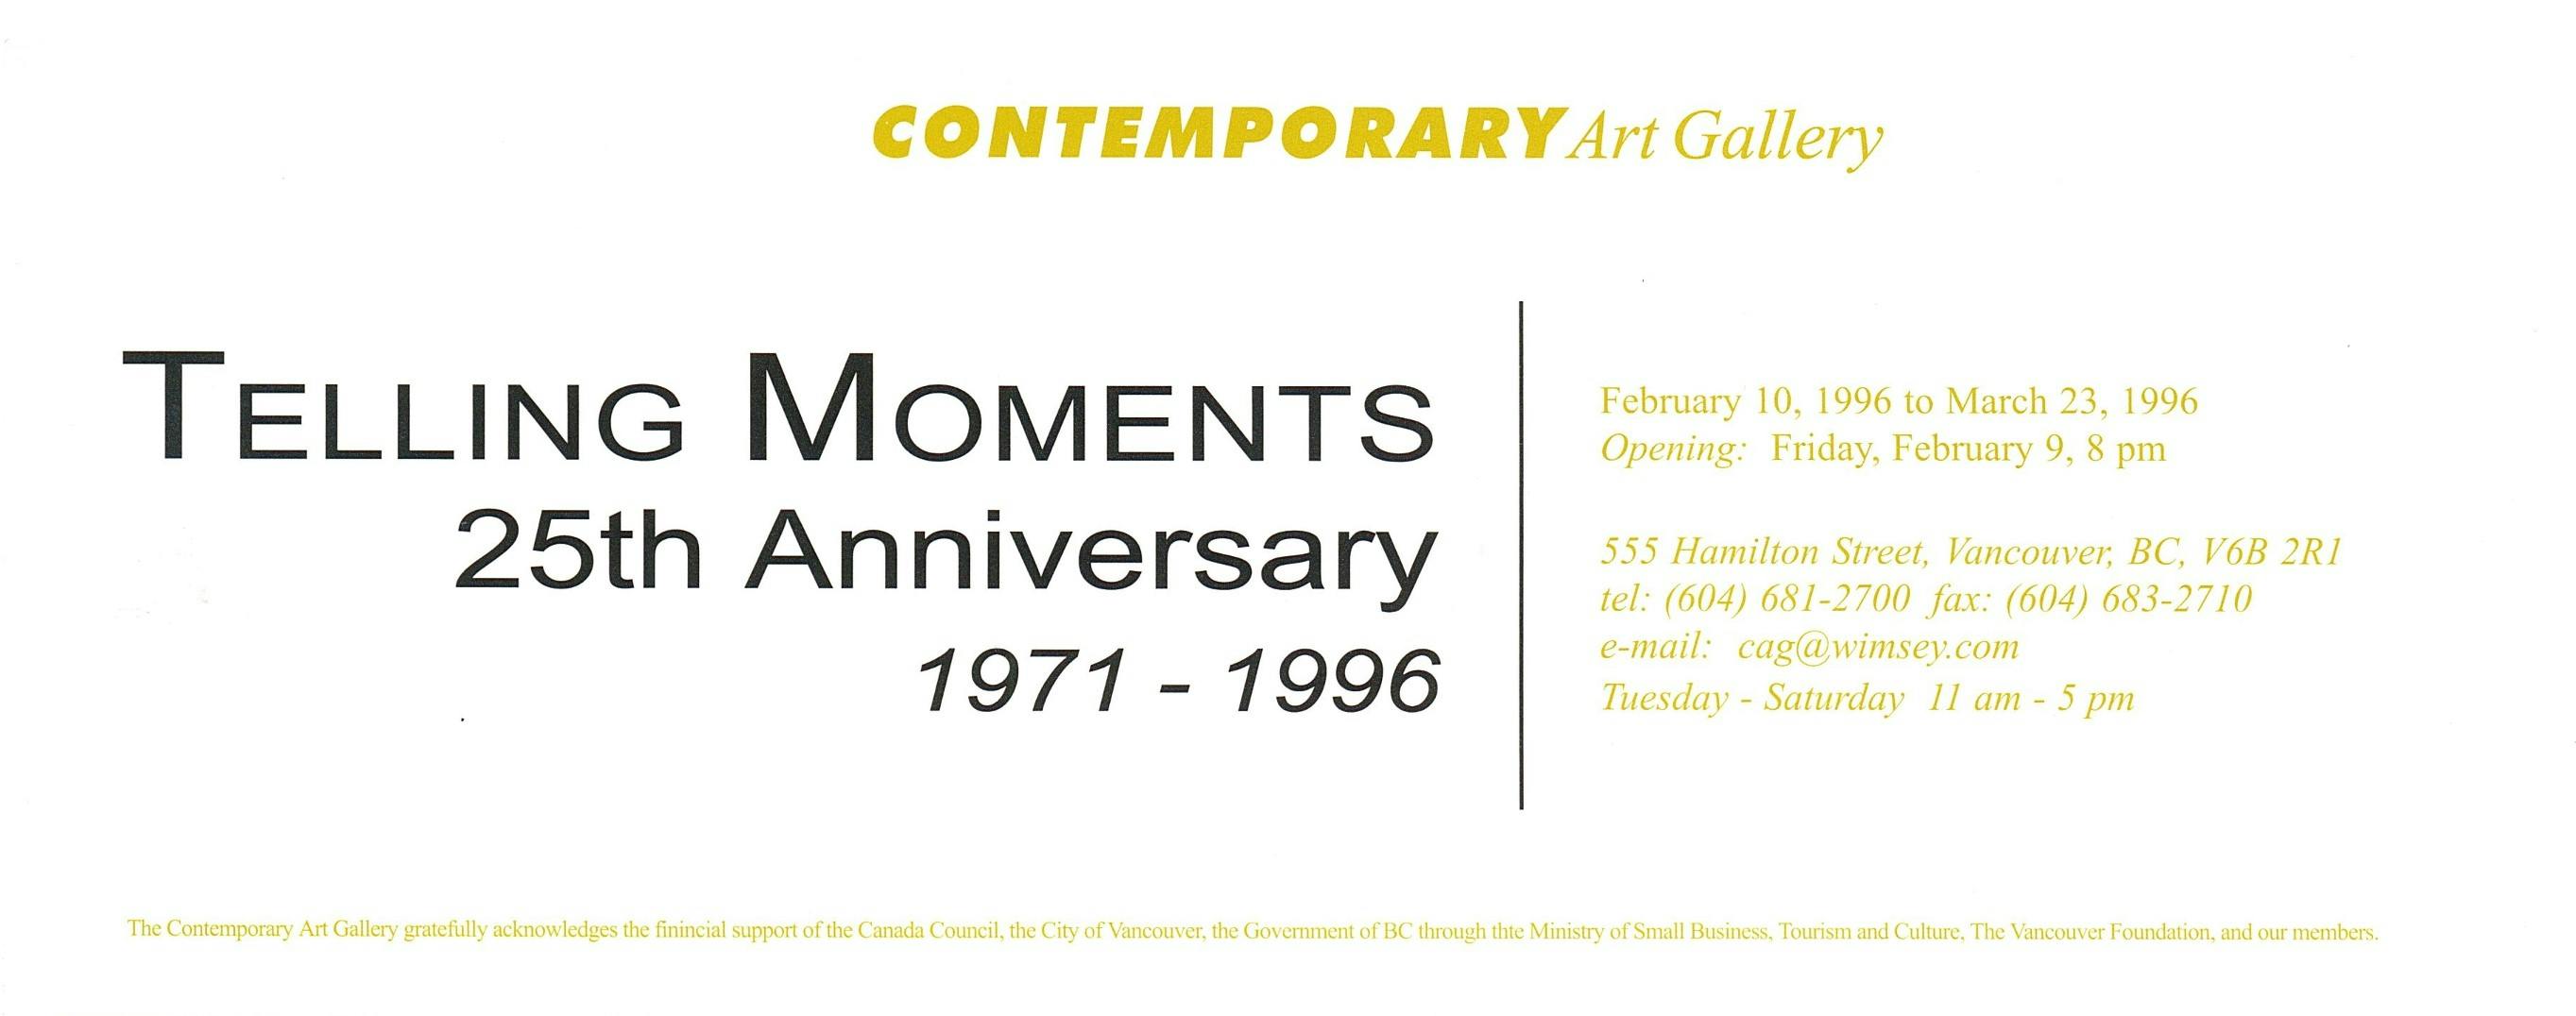 A scanned exhibition invitation. It has a white background with yellow text that contains information about the exhibition and gallery. The exhibition title is written in bold black text.